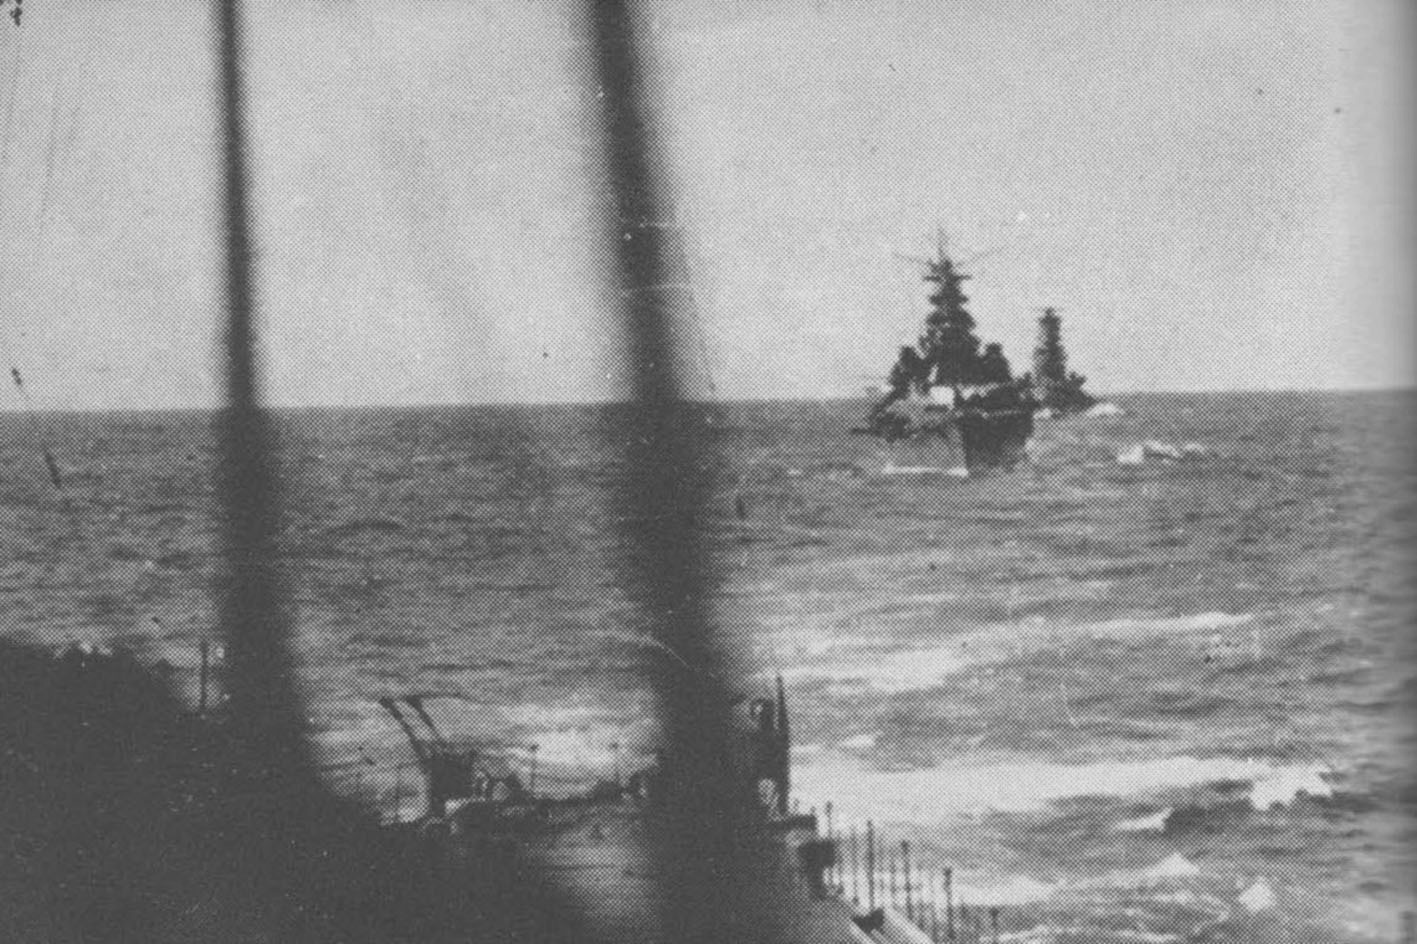 Kirishima and Takao underway, en route to the Guadalcanal area in the Solomon Islands, 14 Nov 1942; photograph taken from cruiser Atago part of which could be seen in foreground